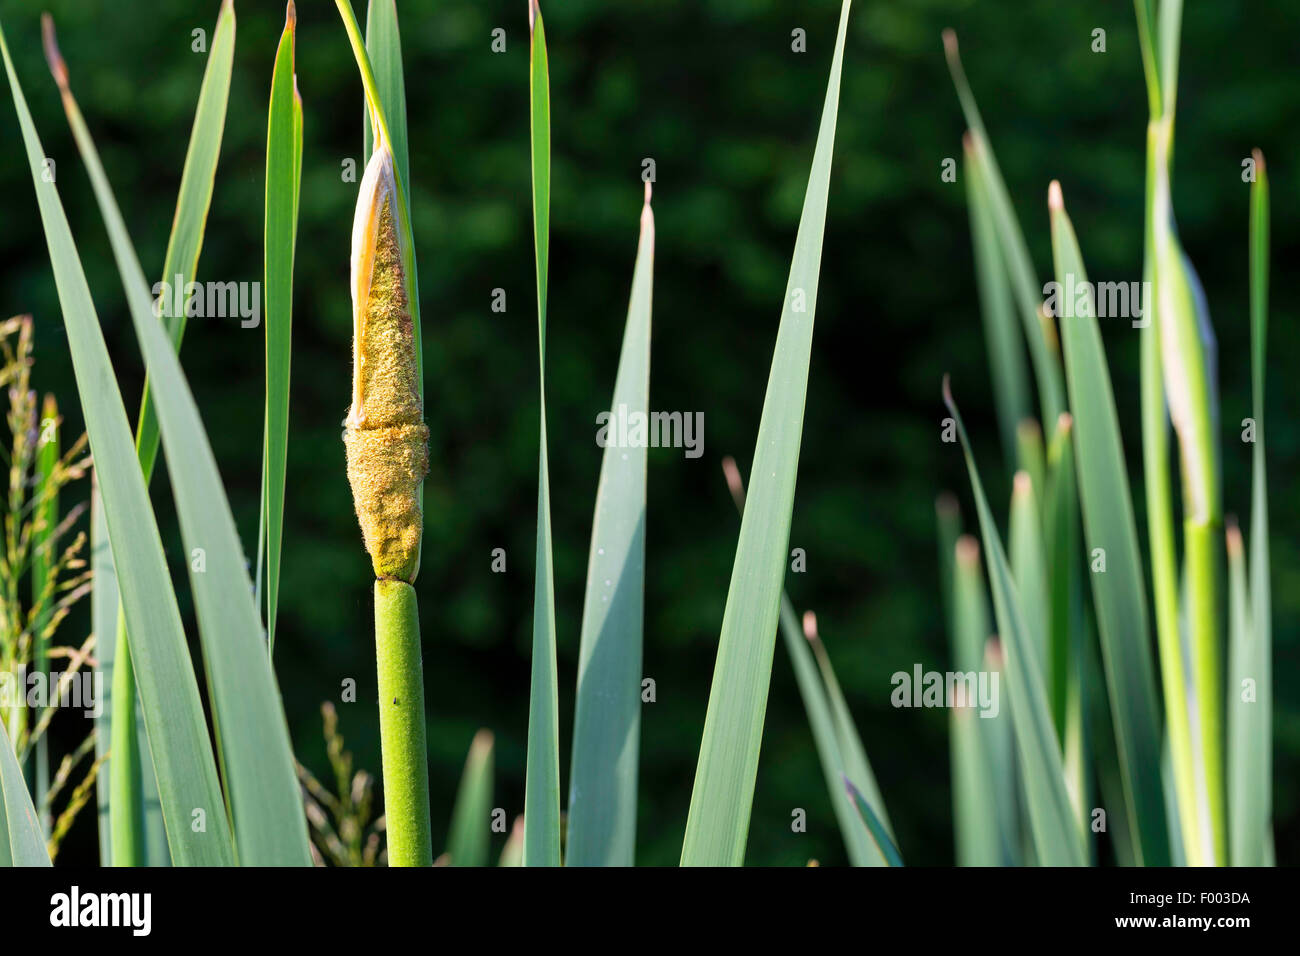 common cattail, broad-leaved cattail, broad-leaved cat's tail, great reedmace, bulrush (Typha latifolia), inflorescence, Germany Stock Photo